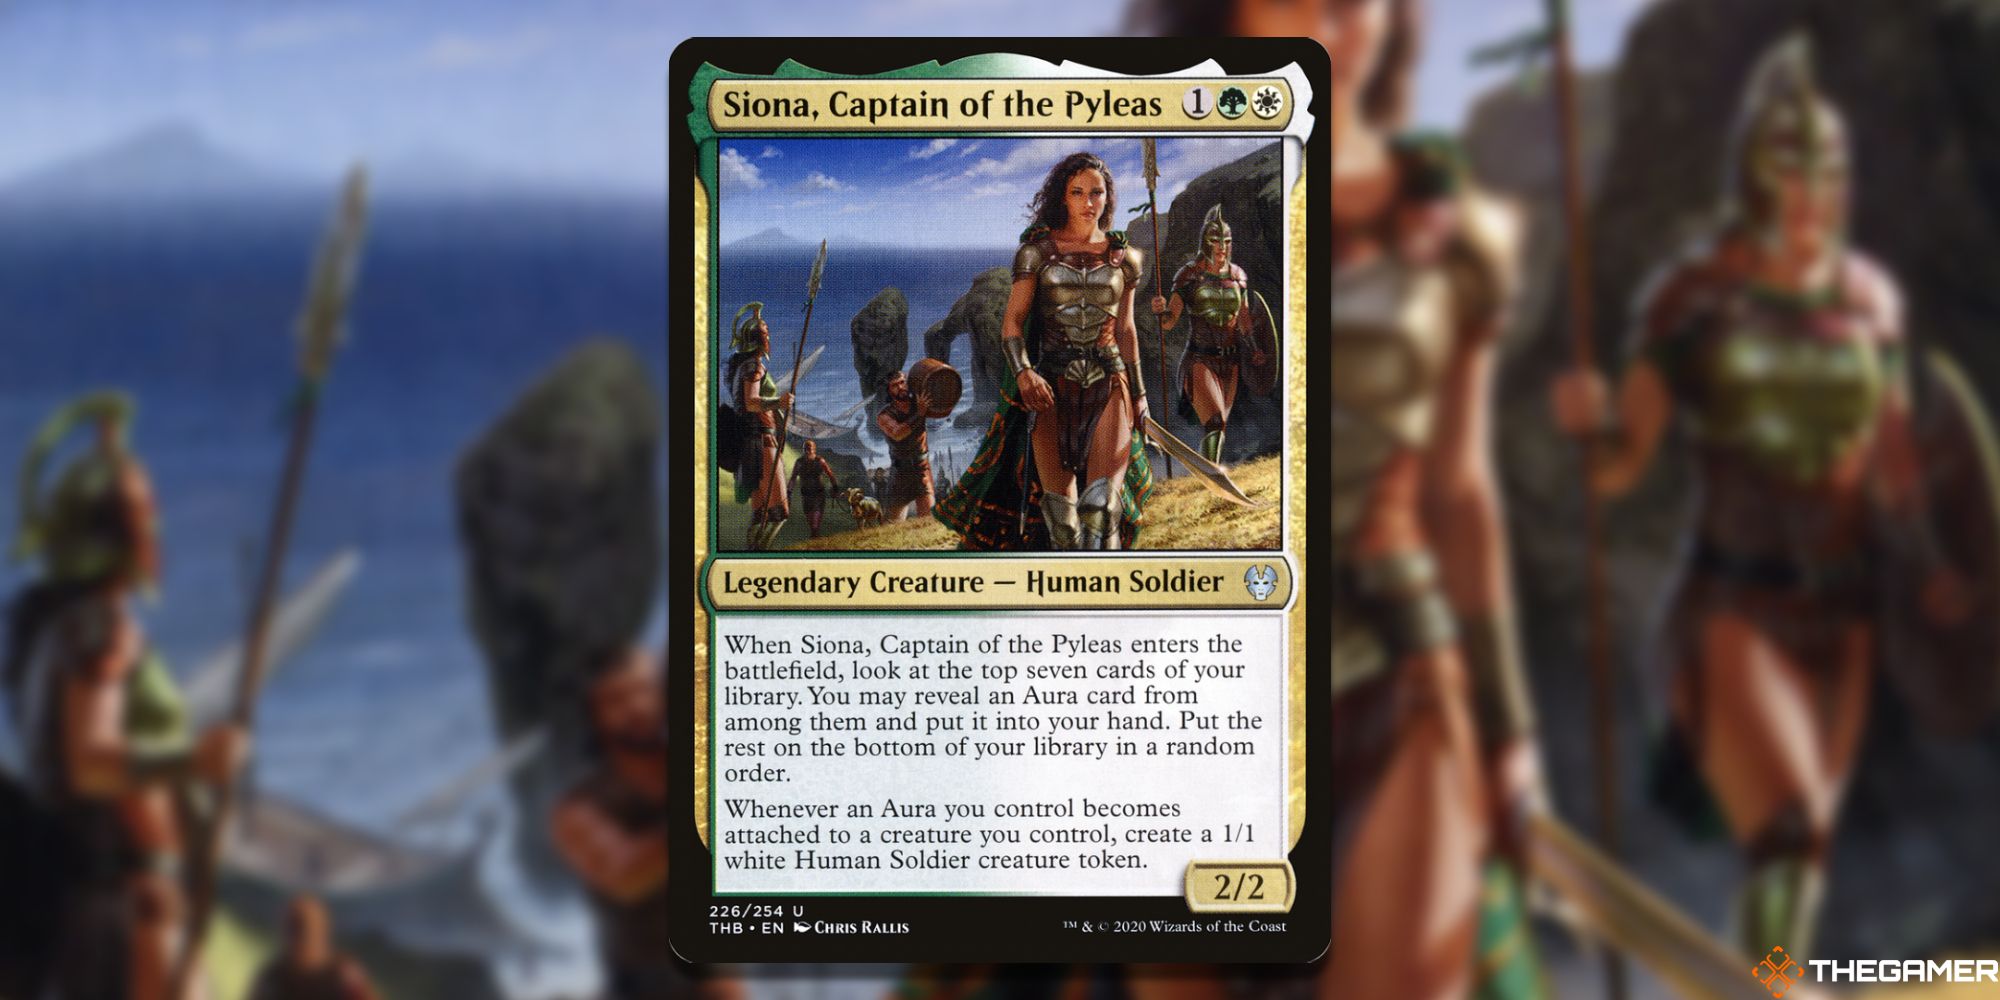 Image of the Siona, Captain of the Pyleas card in Magic: The Gathering, with art by Chris Rallis